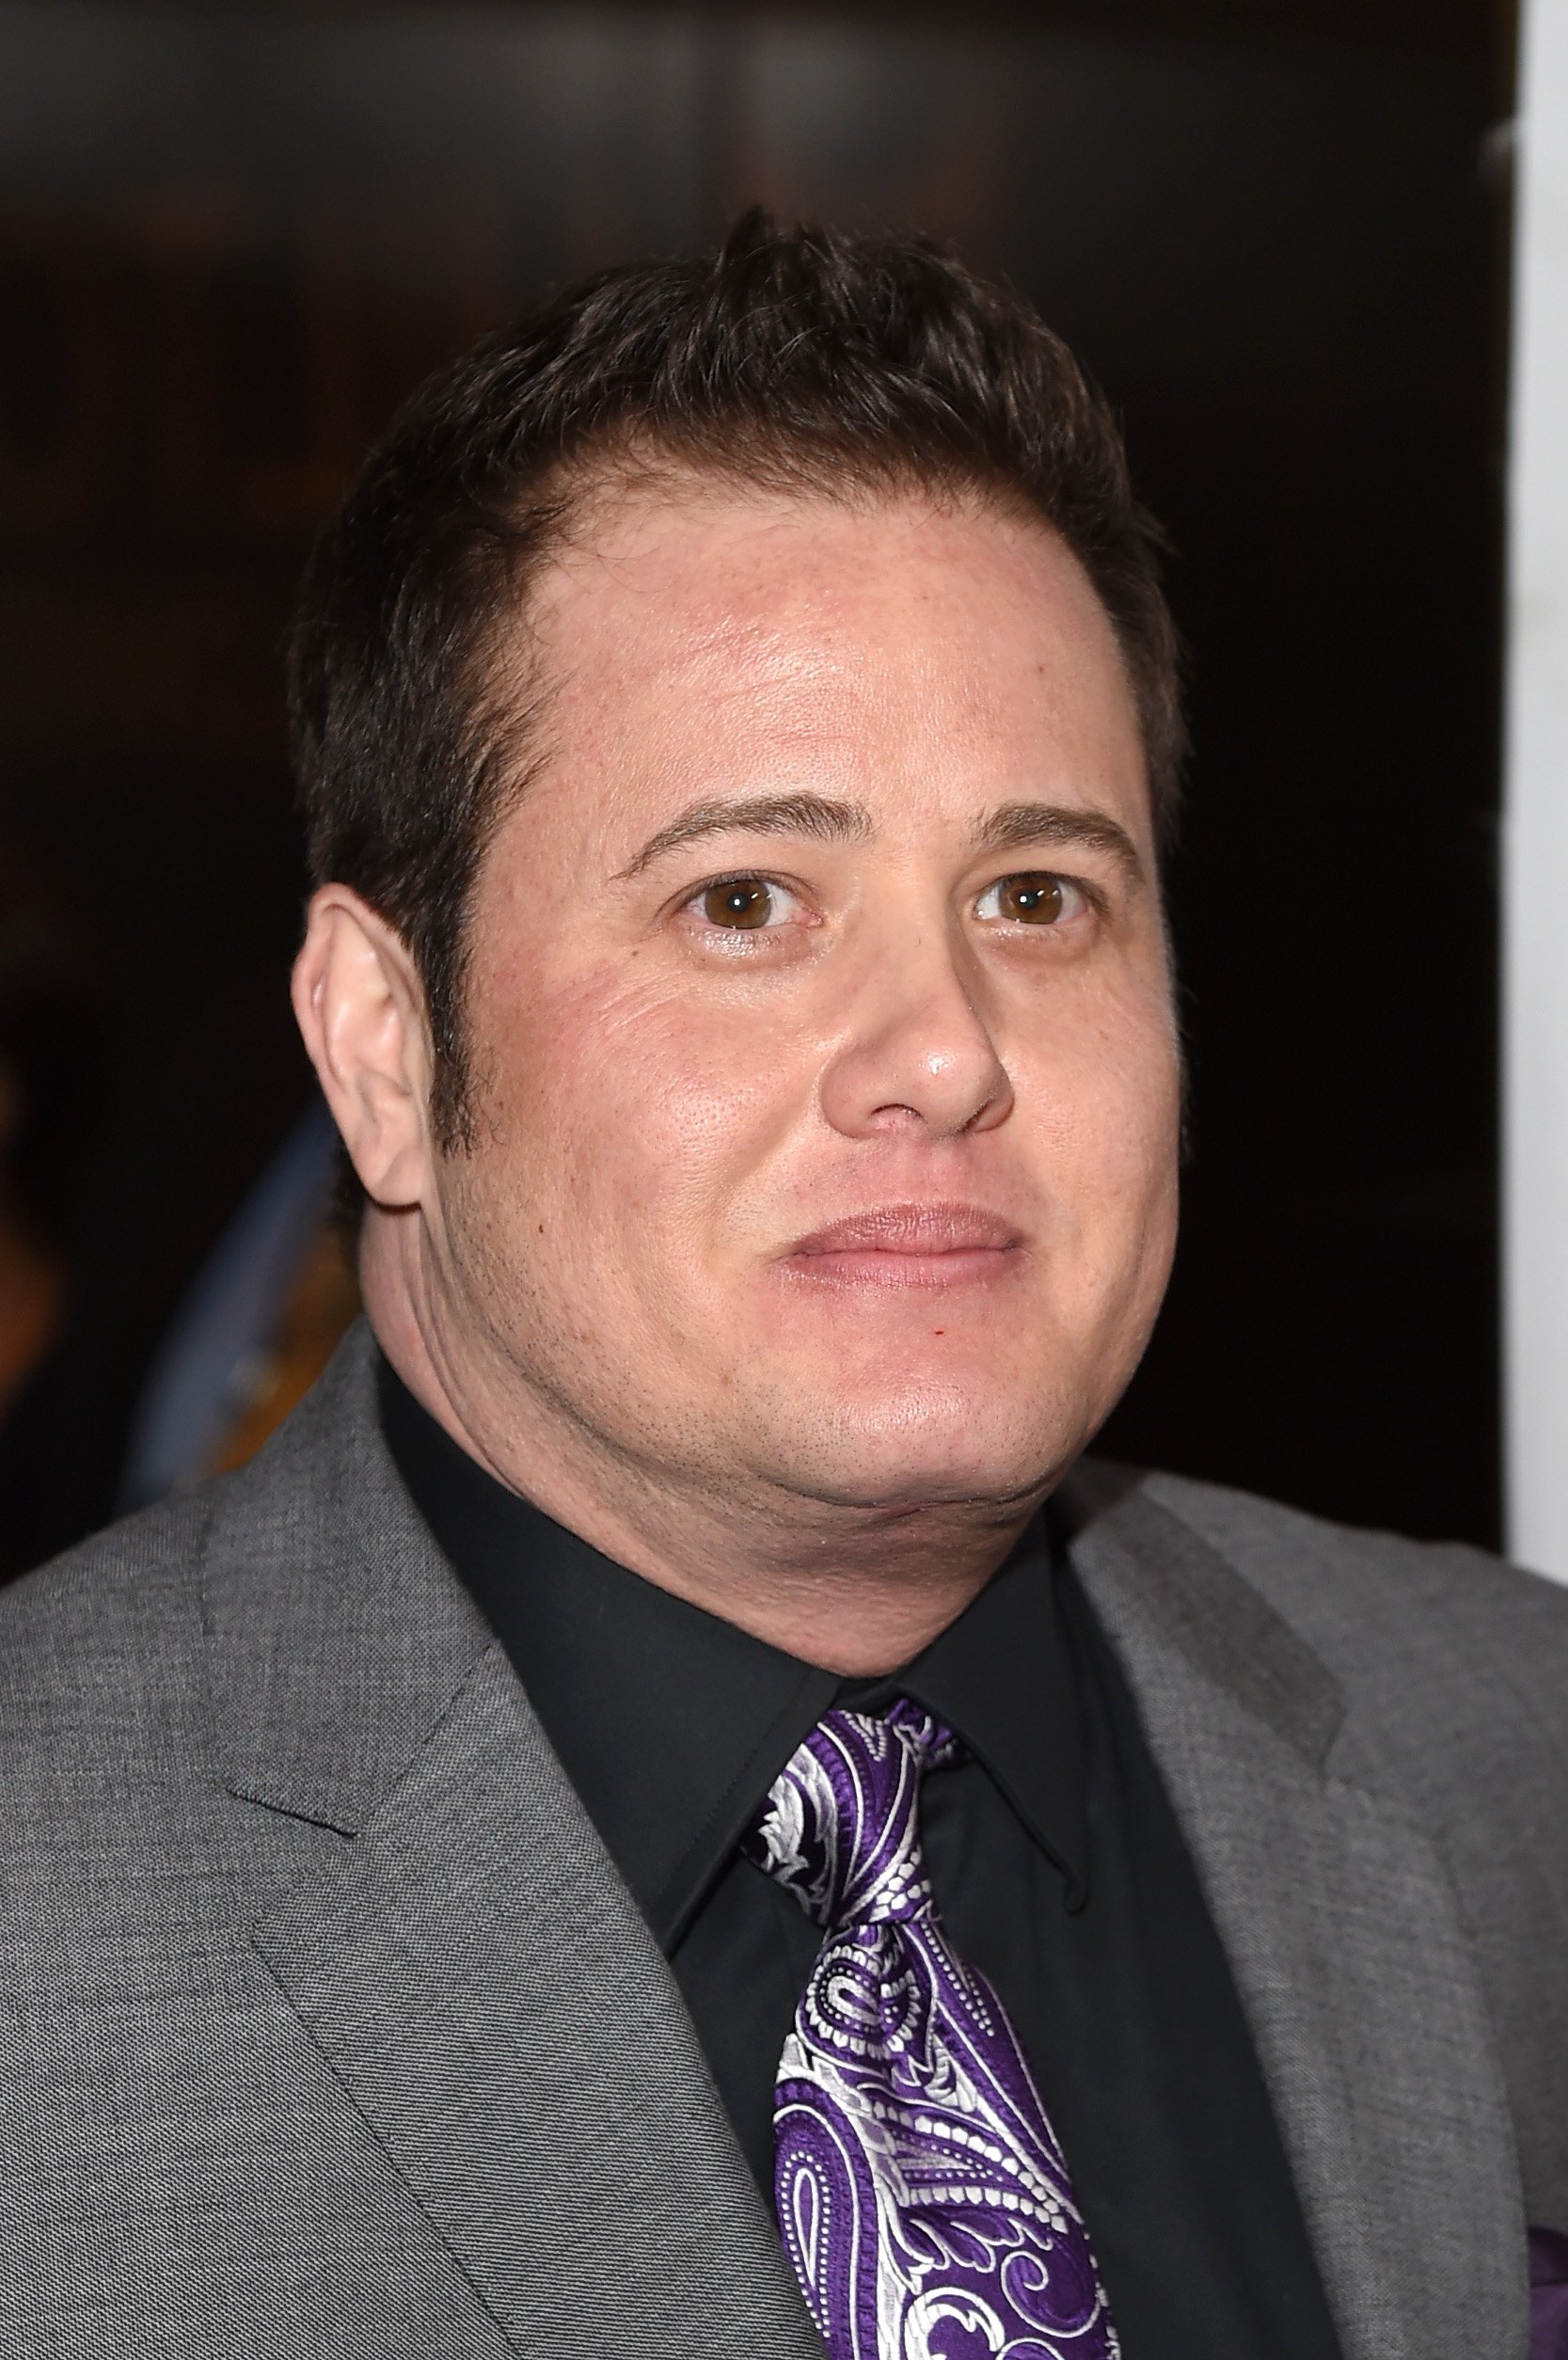 Chaz Bono attends the 25th Annual GLAAD Media Awards at The Beverly Hilton Hotel on April 12, 2014 | Photo: GettyImages